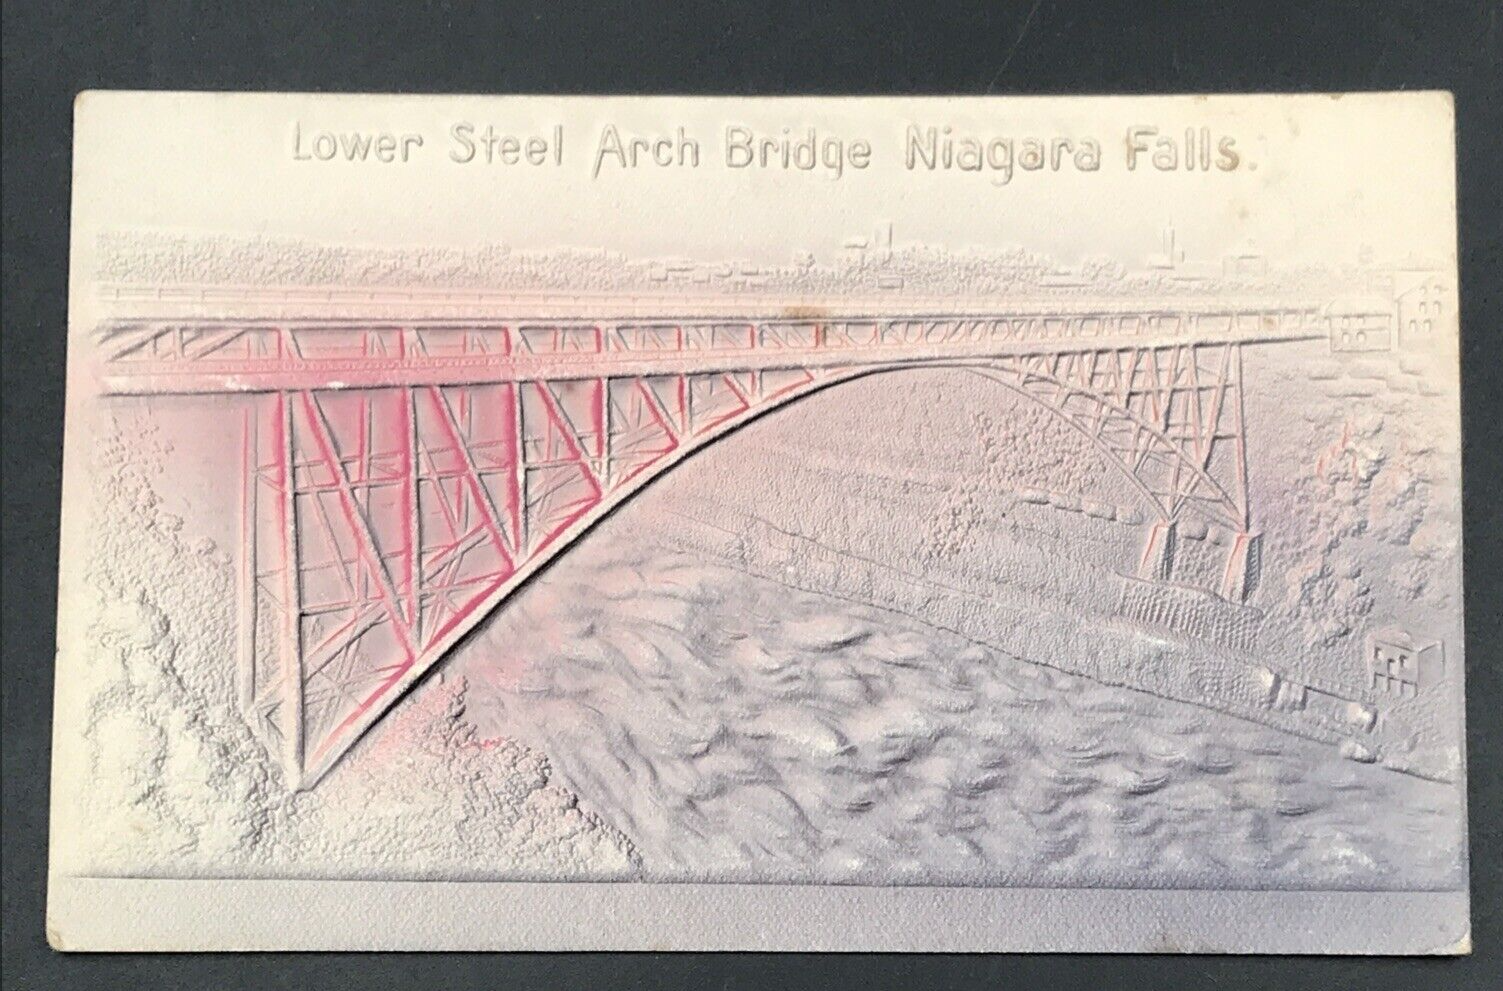 Primary image for 1908 Embossed Lower Steel Arch Bridge Niagara Falls NY Postcard Red Tint